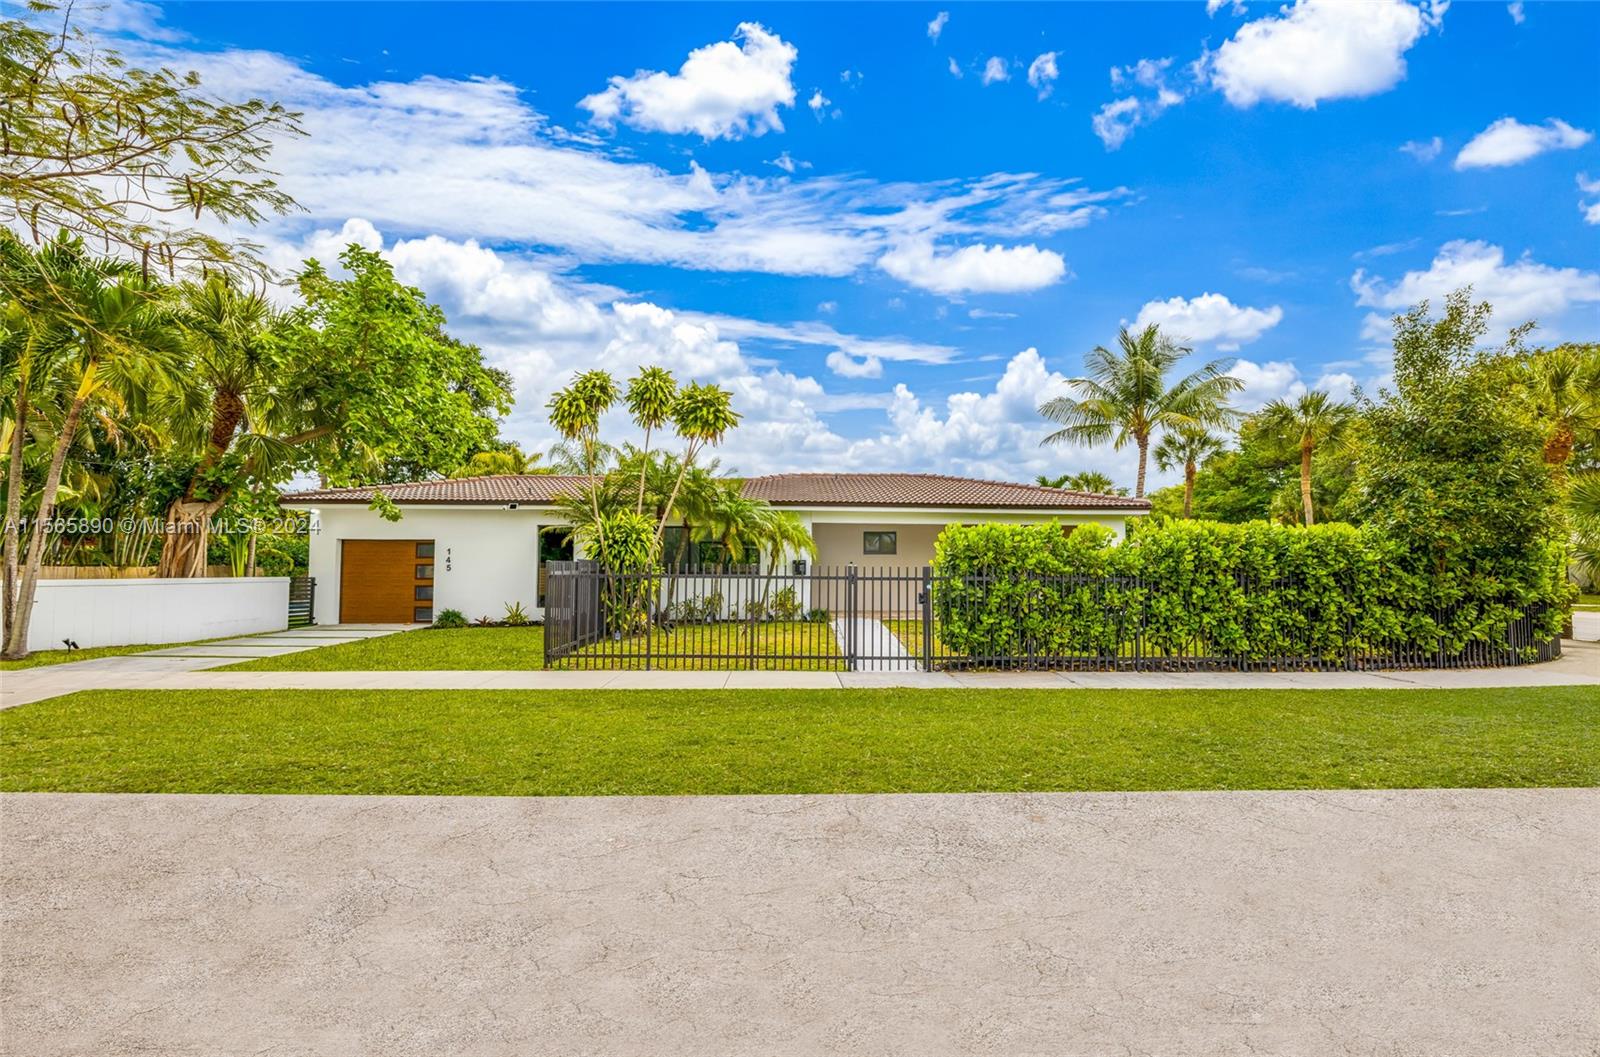 Property for Sale at 145 Nw 95th St, Miami Shores, Miami-Dade County, Florida - Bedrooms: 3 
Bathrooms: 3  - $1,475,000